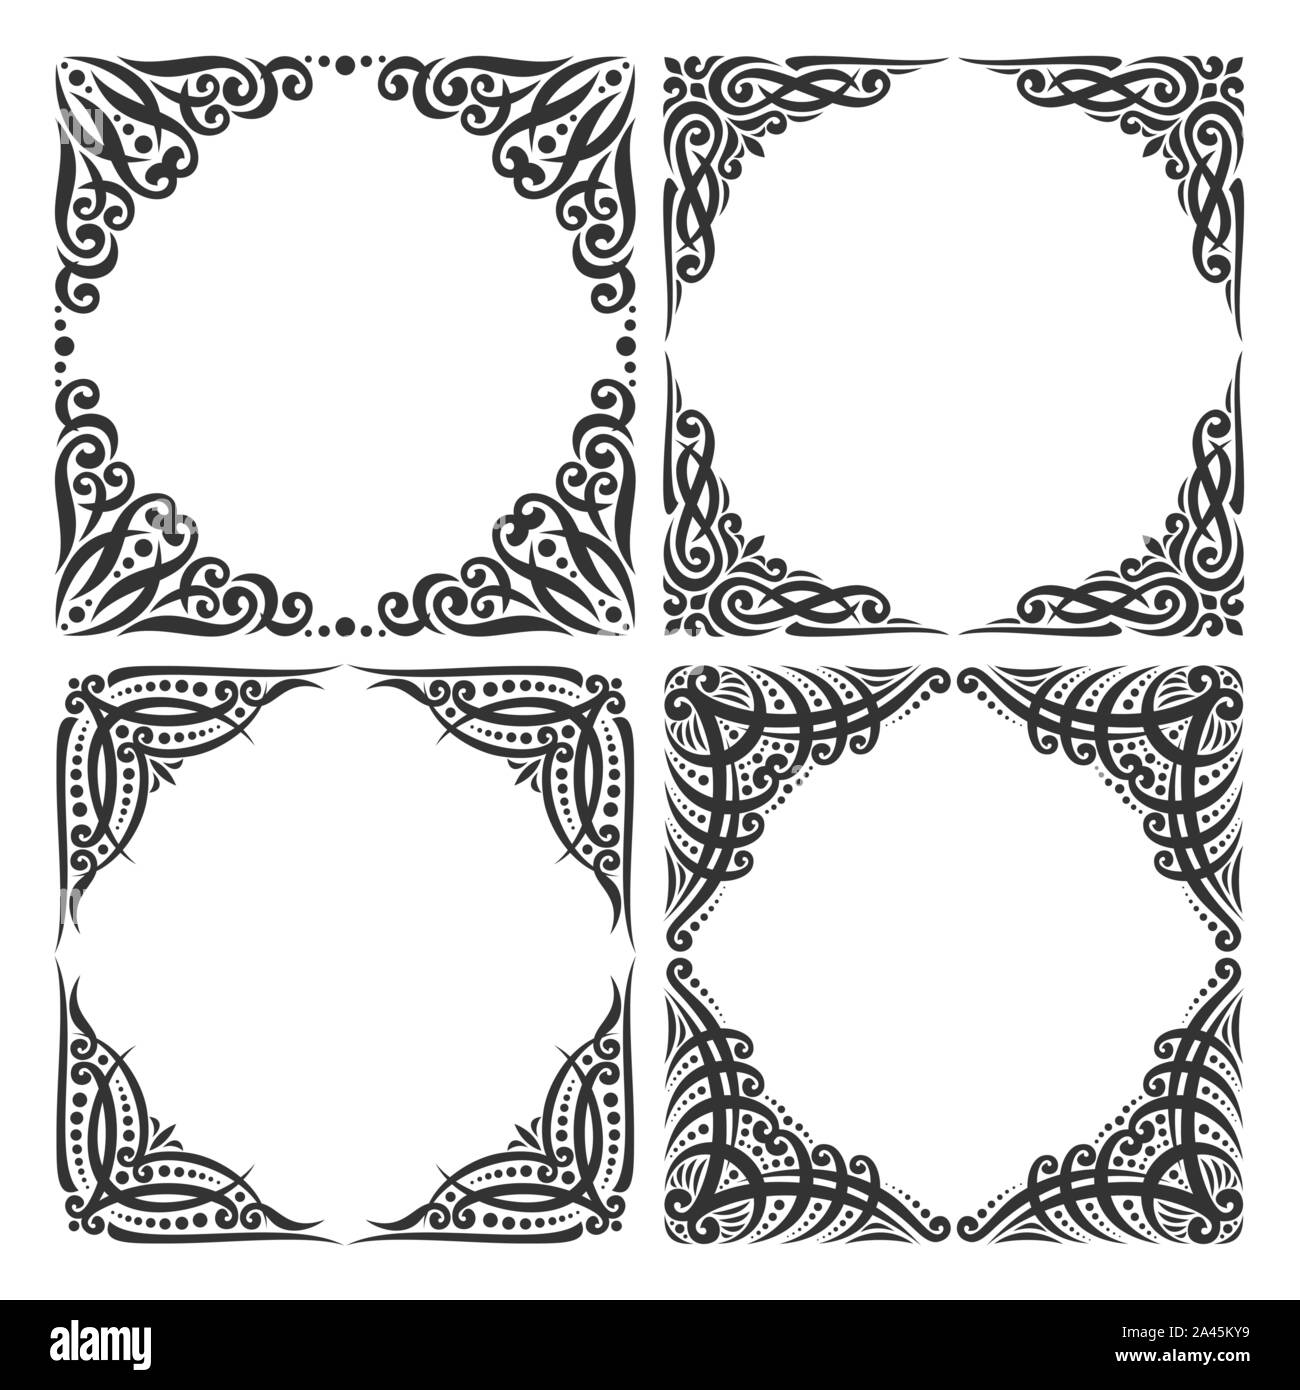 Vector set of decorative black frames on white, ornate decoration with flourishes for wedding invitation, 4 vintage borders with curls and dots, ornam Stock Vector